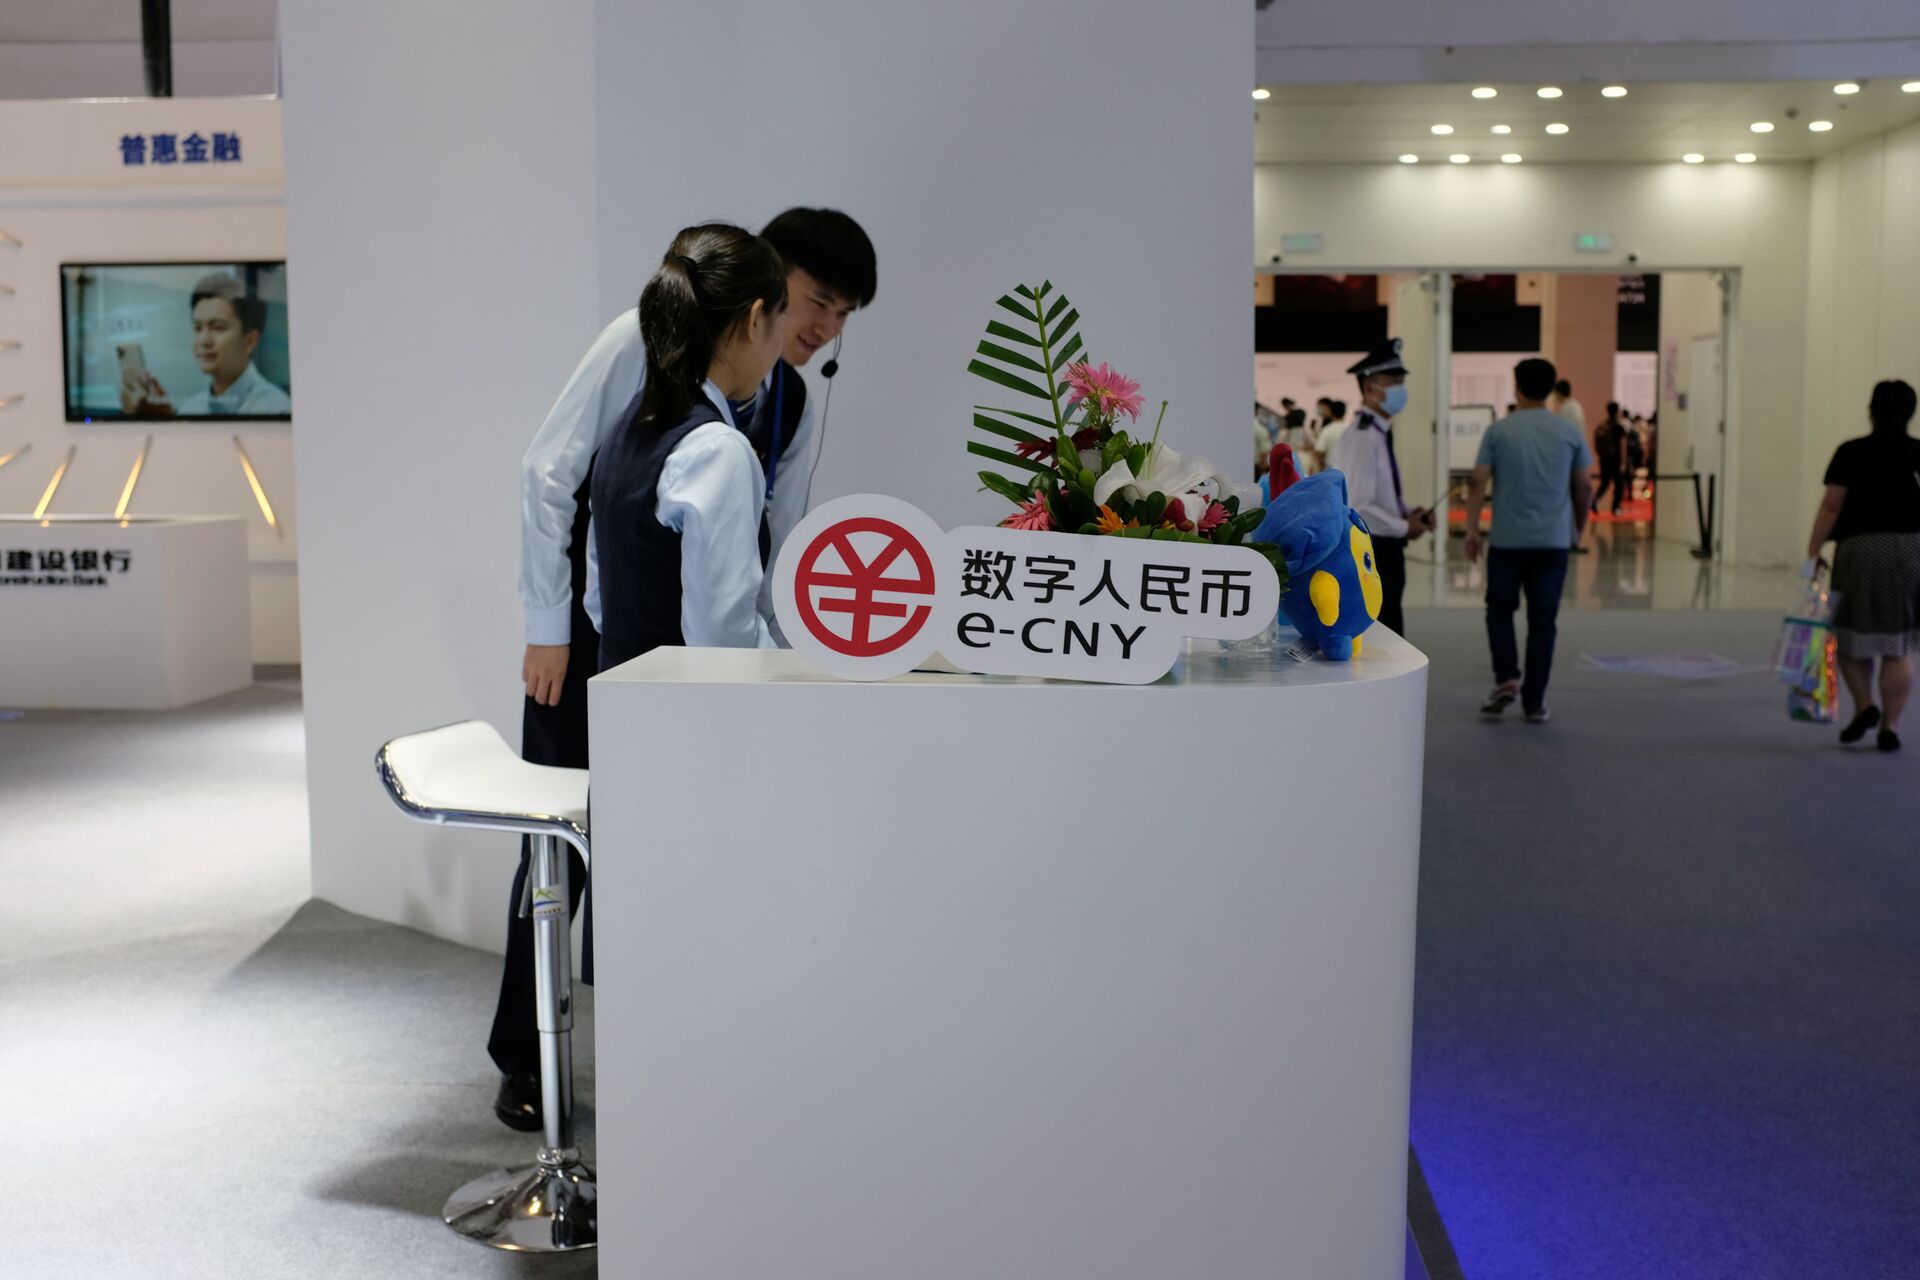 Staff members stand next to a sign of China's digital yuan, or e-CNY, at the World Artificial Intelligence Conference (WAIC) in Shanghai, China July 8, 2021. - Sputnik International, 1920, 07.09.2021